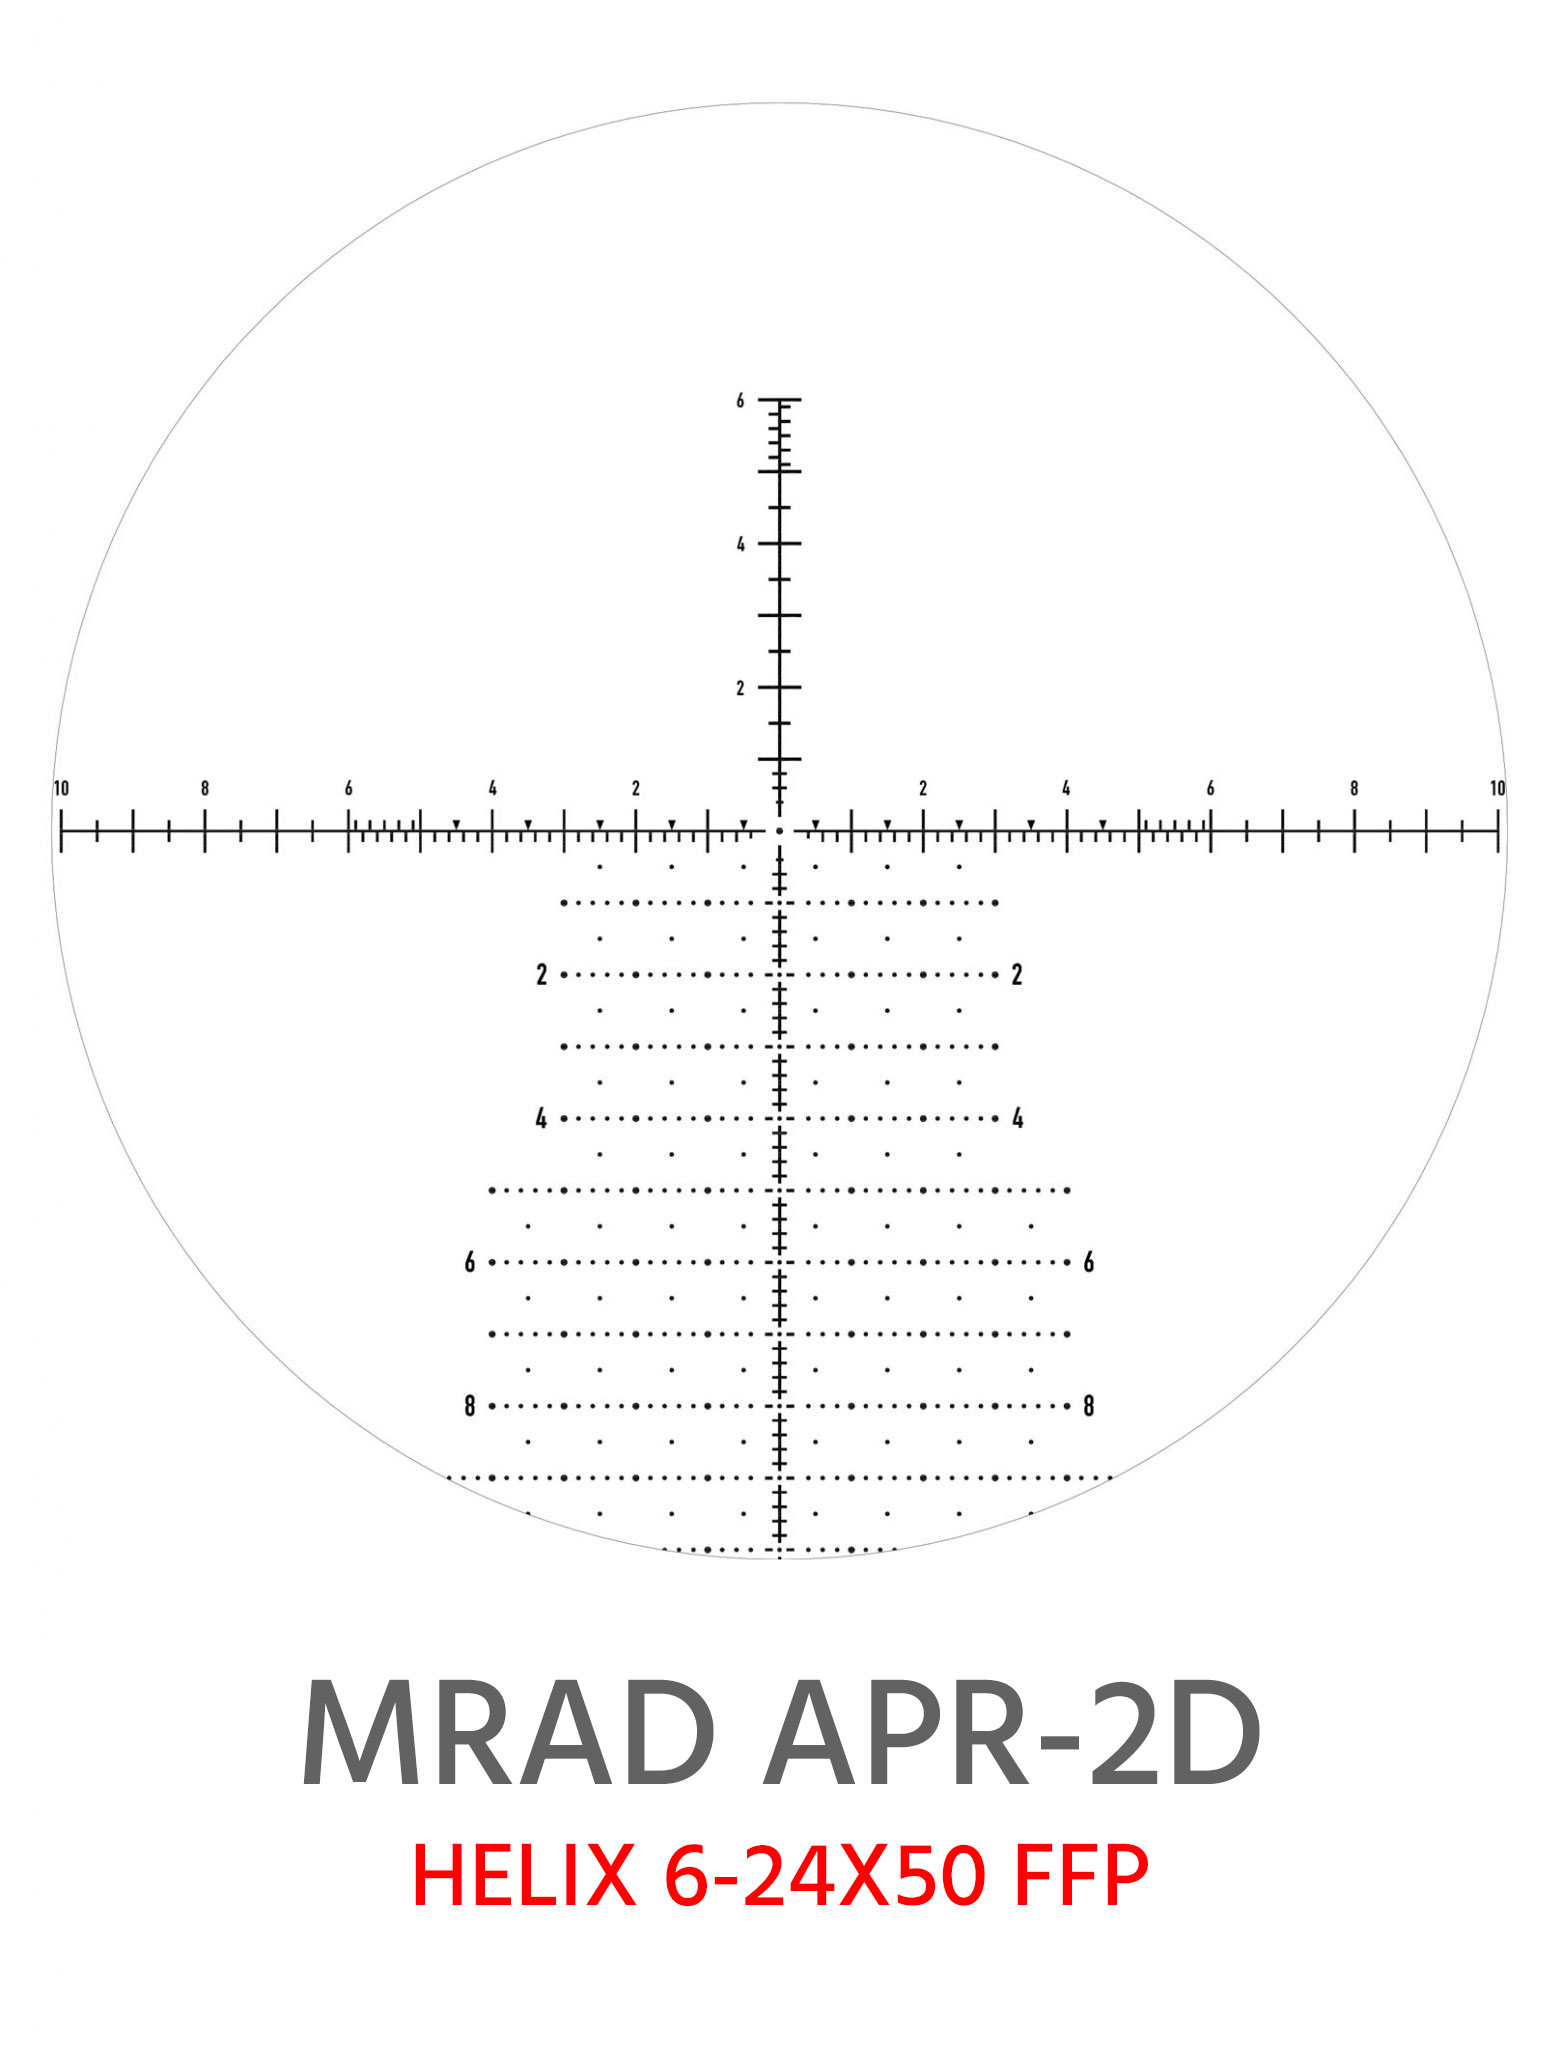 MRAD-APR-2D Reticle for Helix 6-24